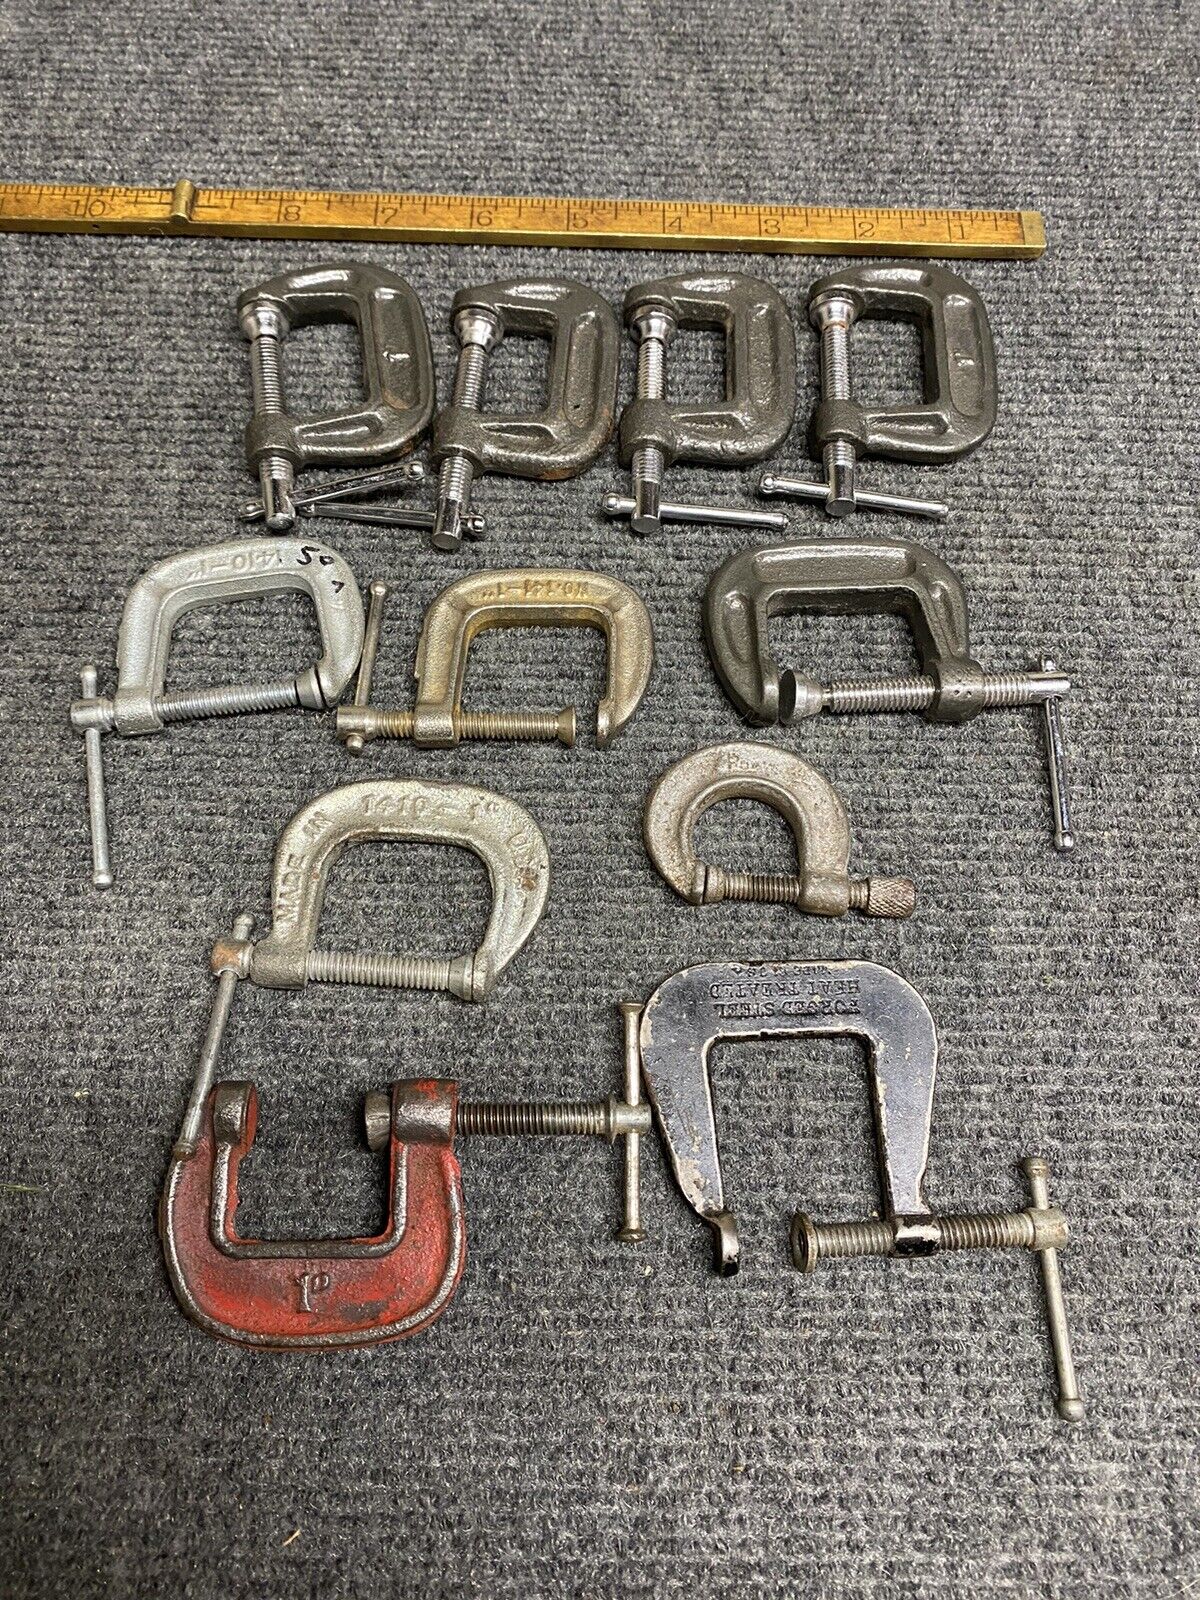 (11) Vintage Small C Clamps Mixed Sizes And Brands